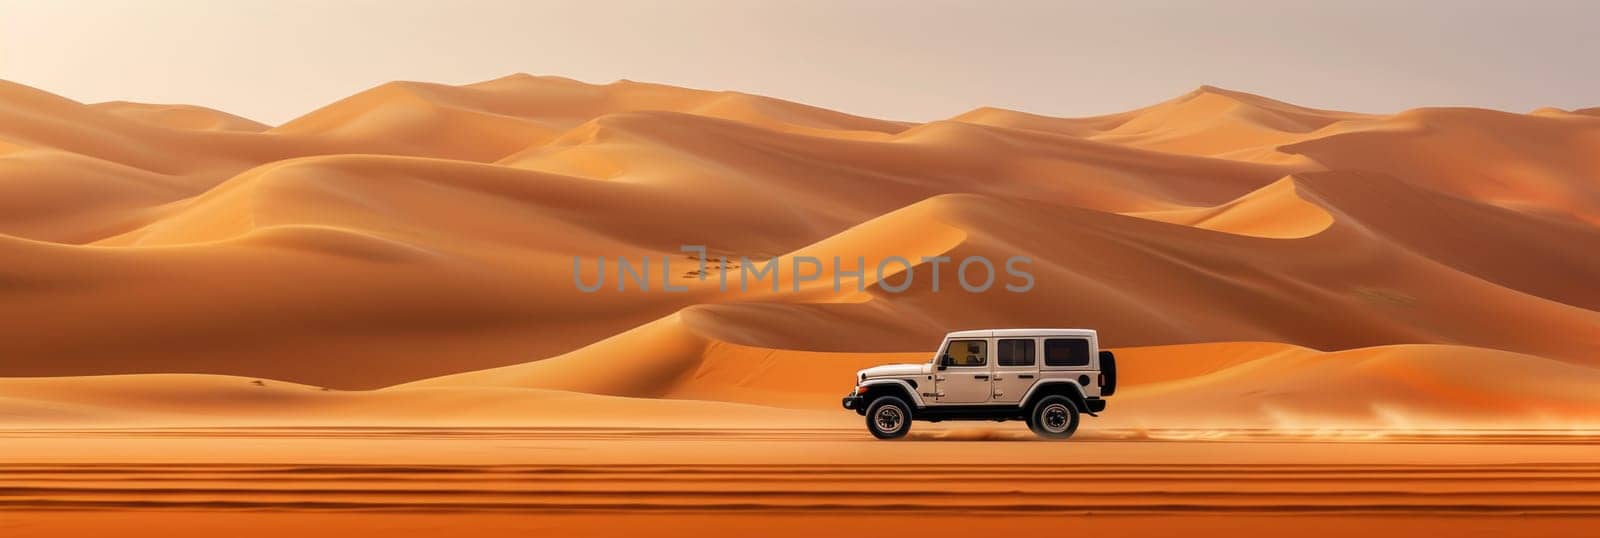 A jeep navigates through the desert landscape, with majestic sand dunes stretching across the horizon.